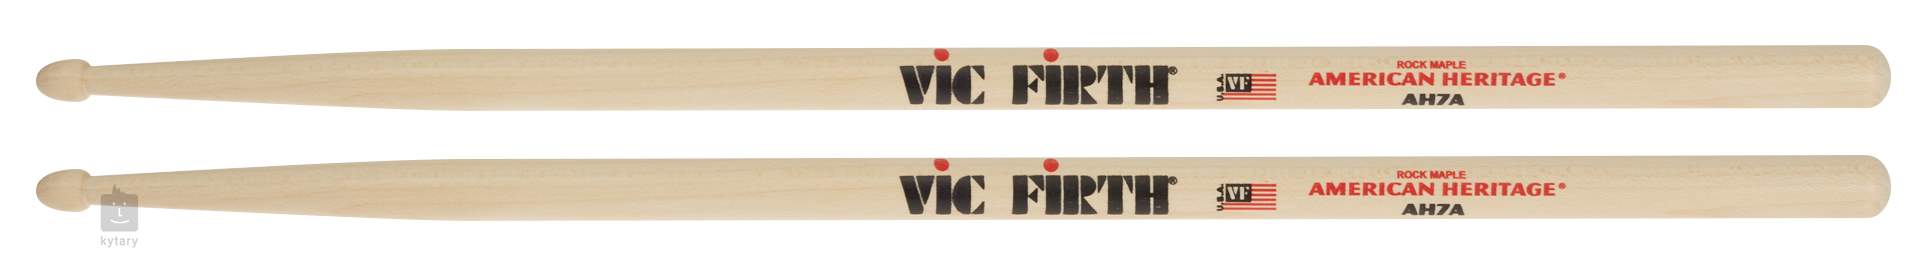 VIC FIRTH AH7A American Heritage Maple Drumsticks